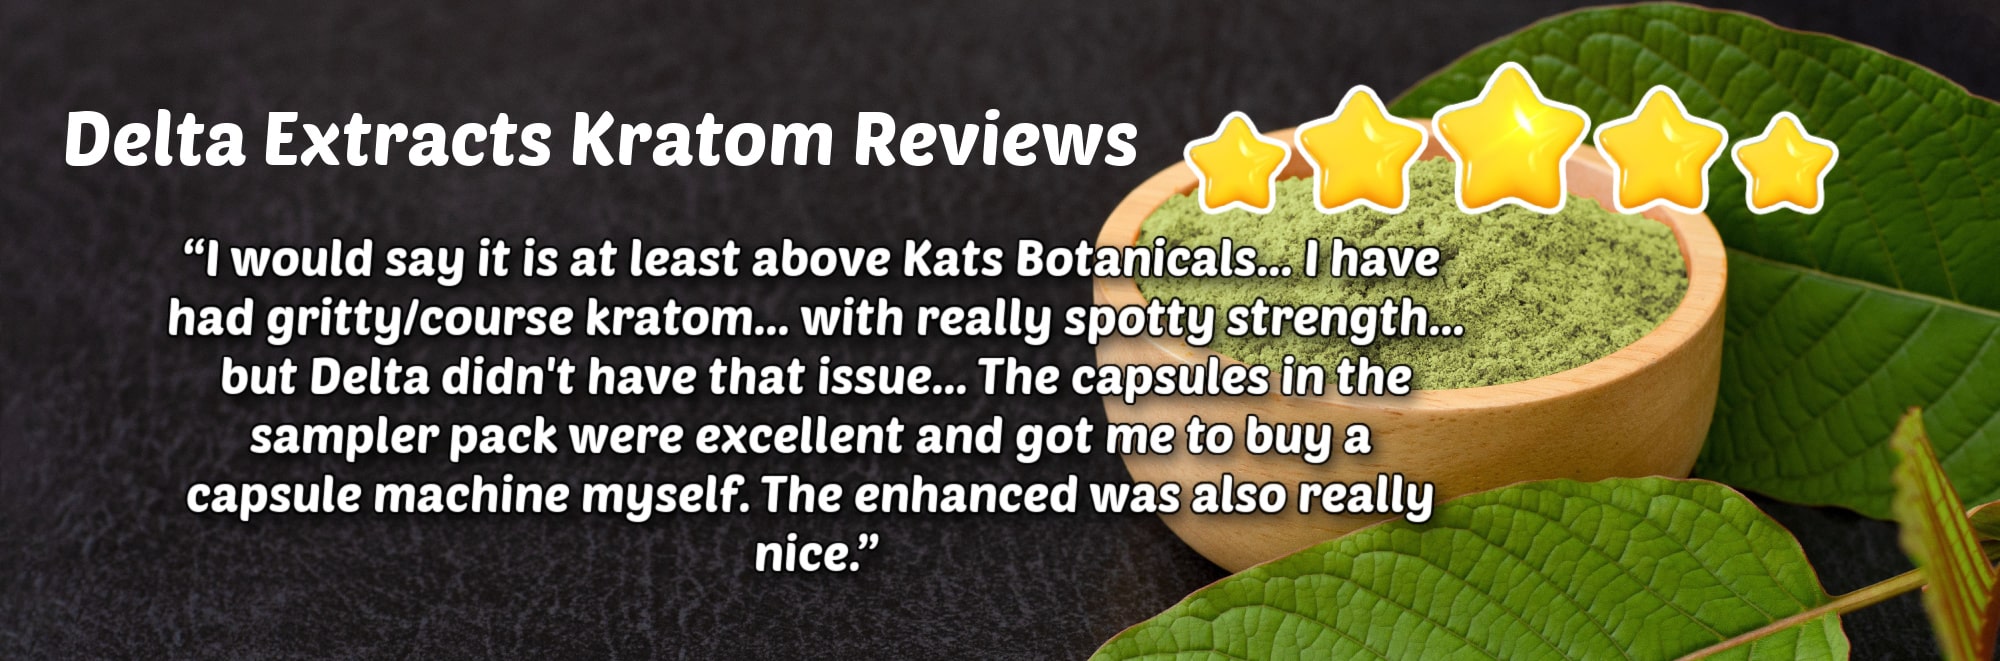 image of delta extracts kratom customer reviews